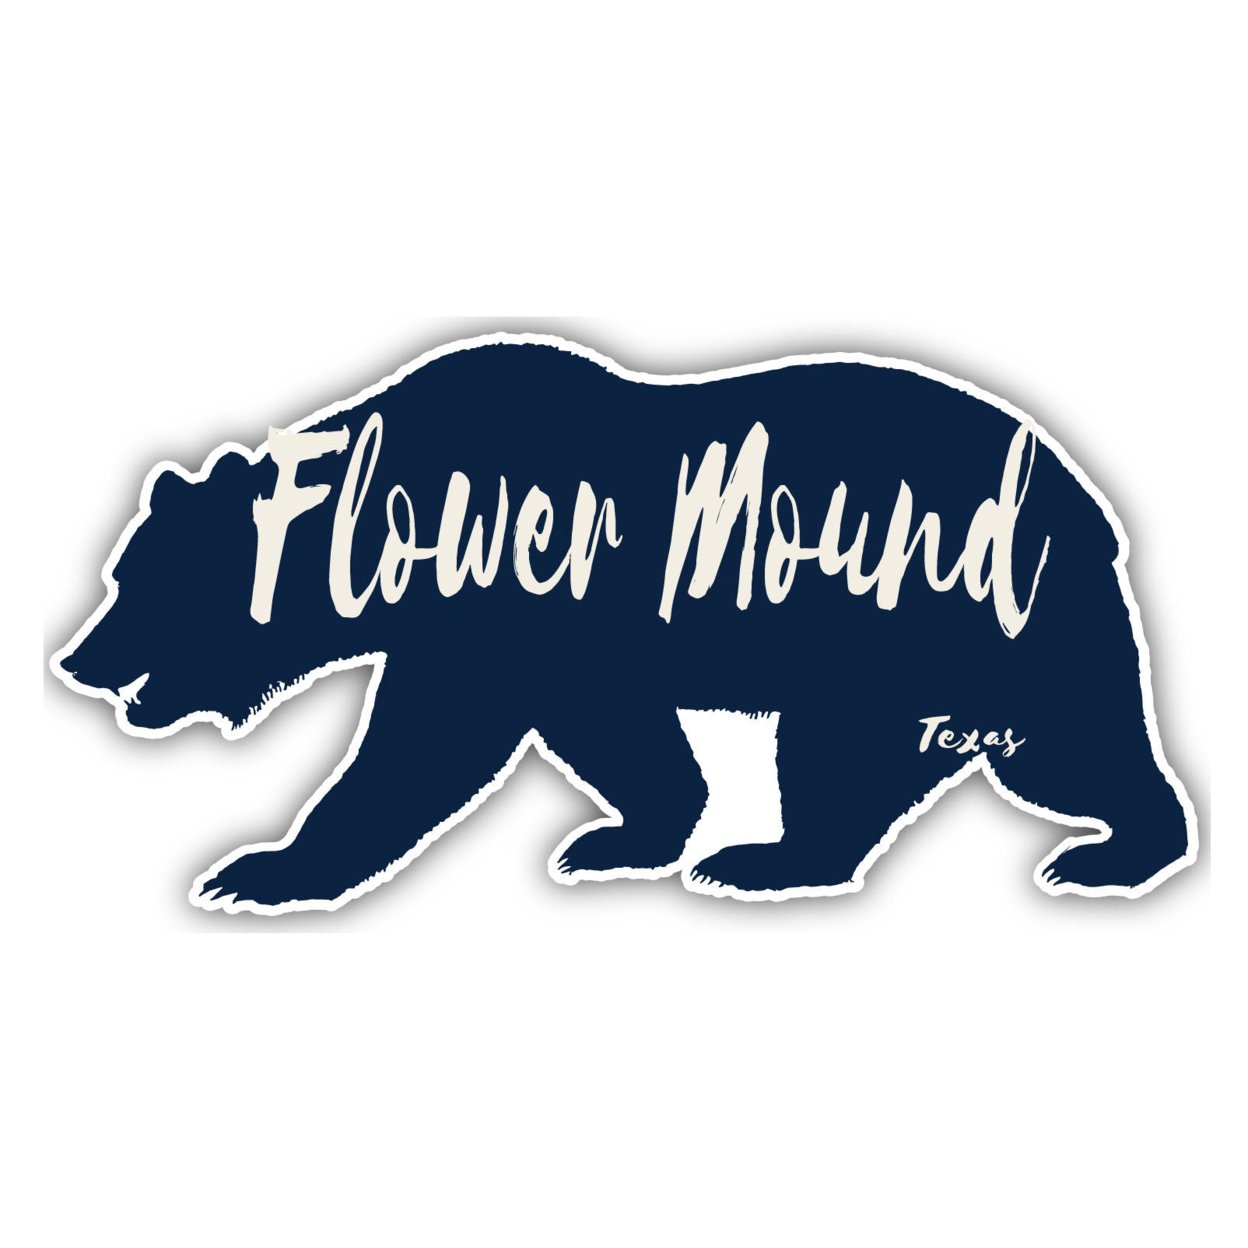 Flower Mound Texas Souvenir Decorative Stickers (Choose Theme And Size) - 4-Pack, 4-Inch, Tent